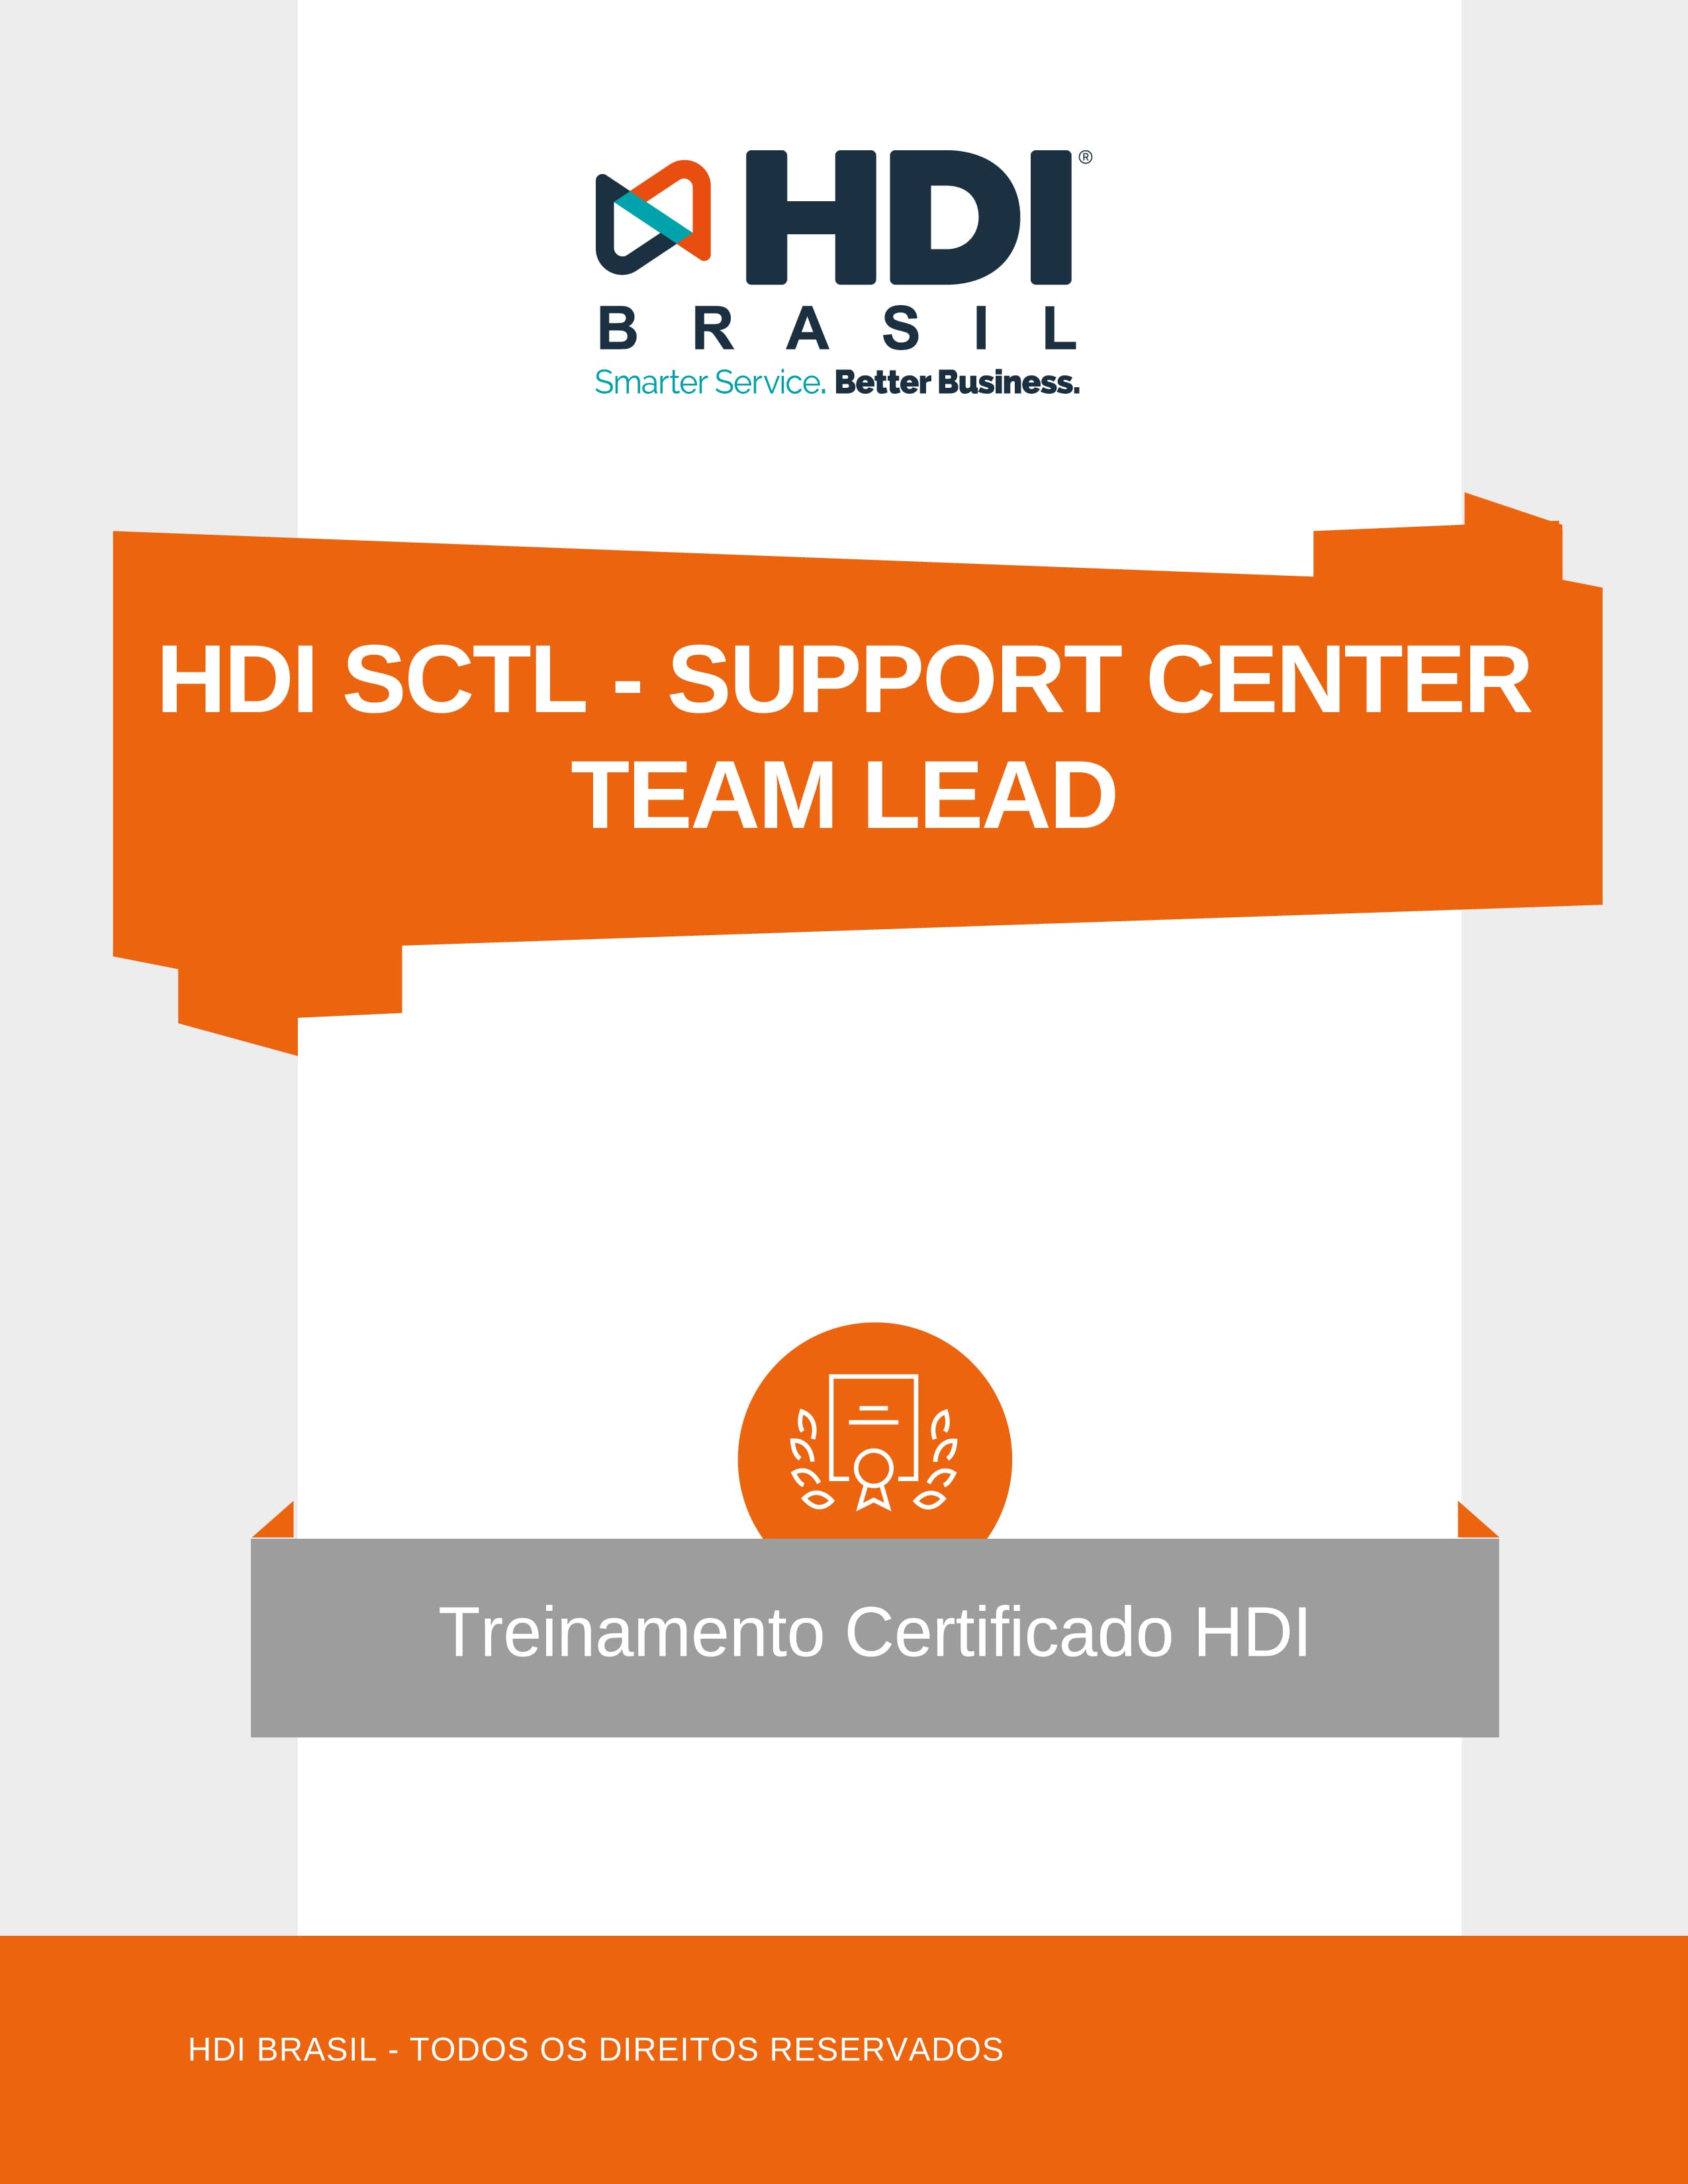 HDI SCTL - SUPPORT CENTER TEAM LEAD